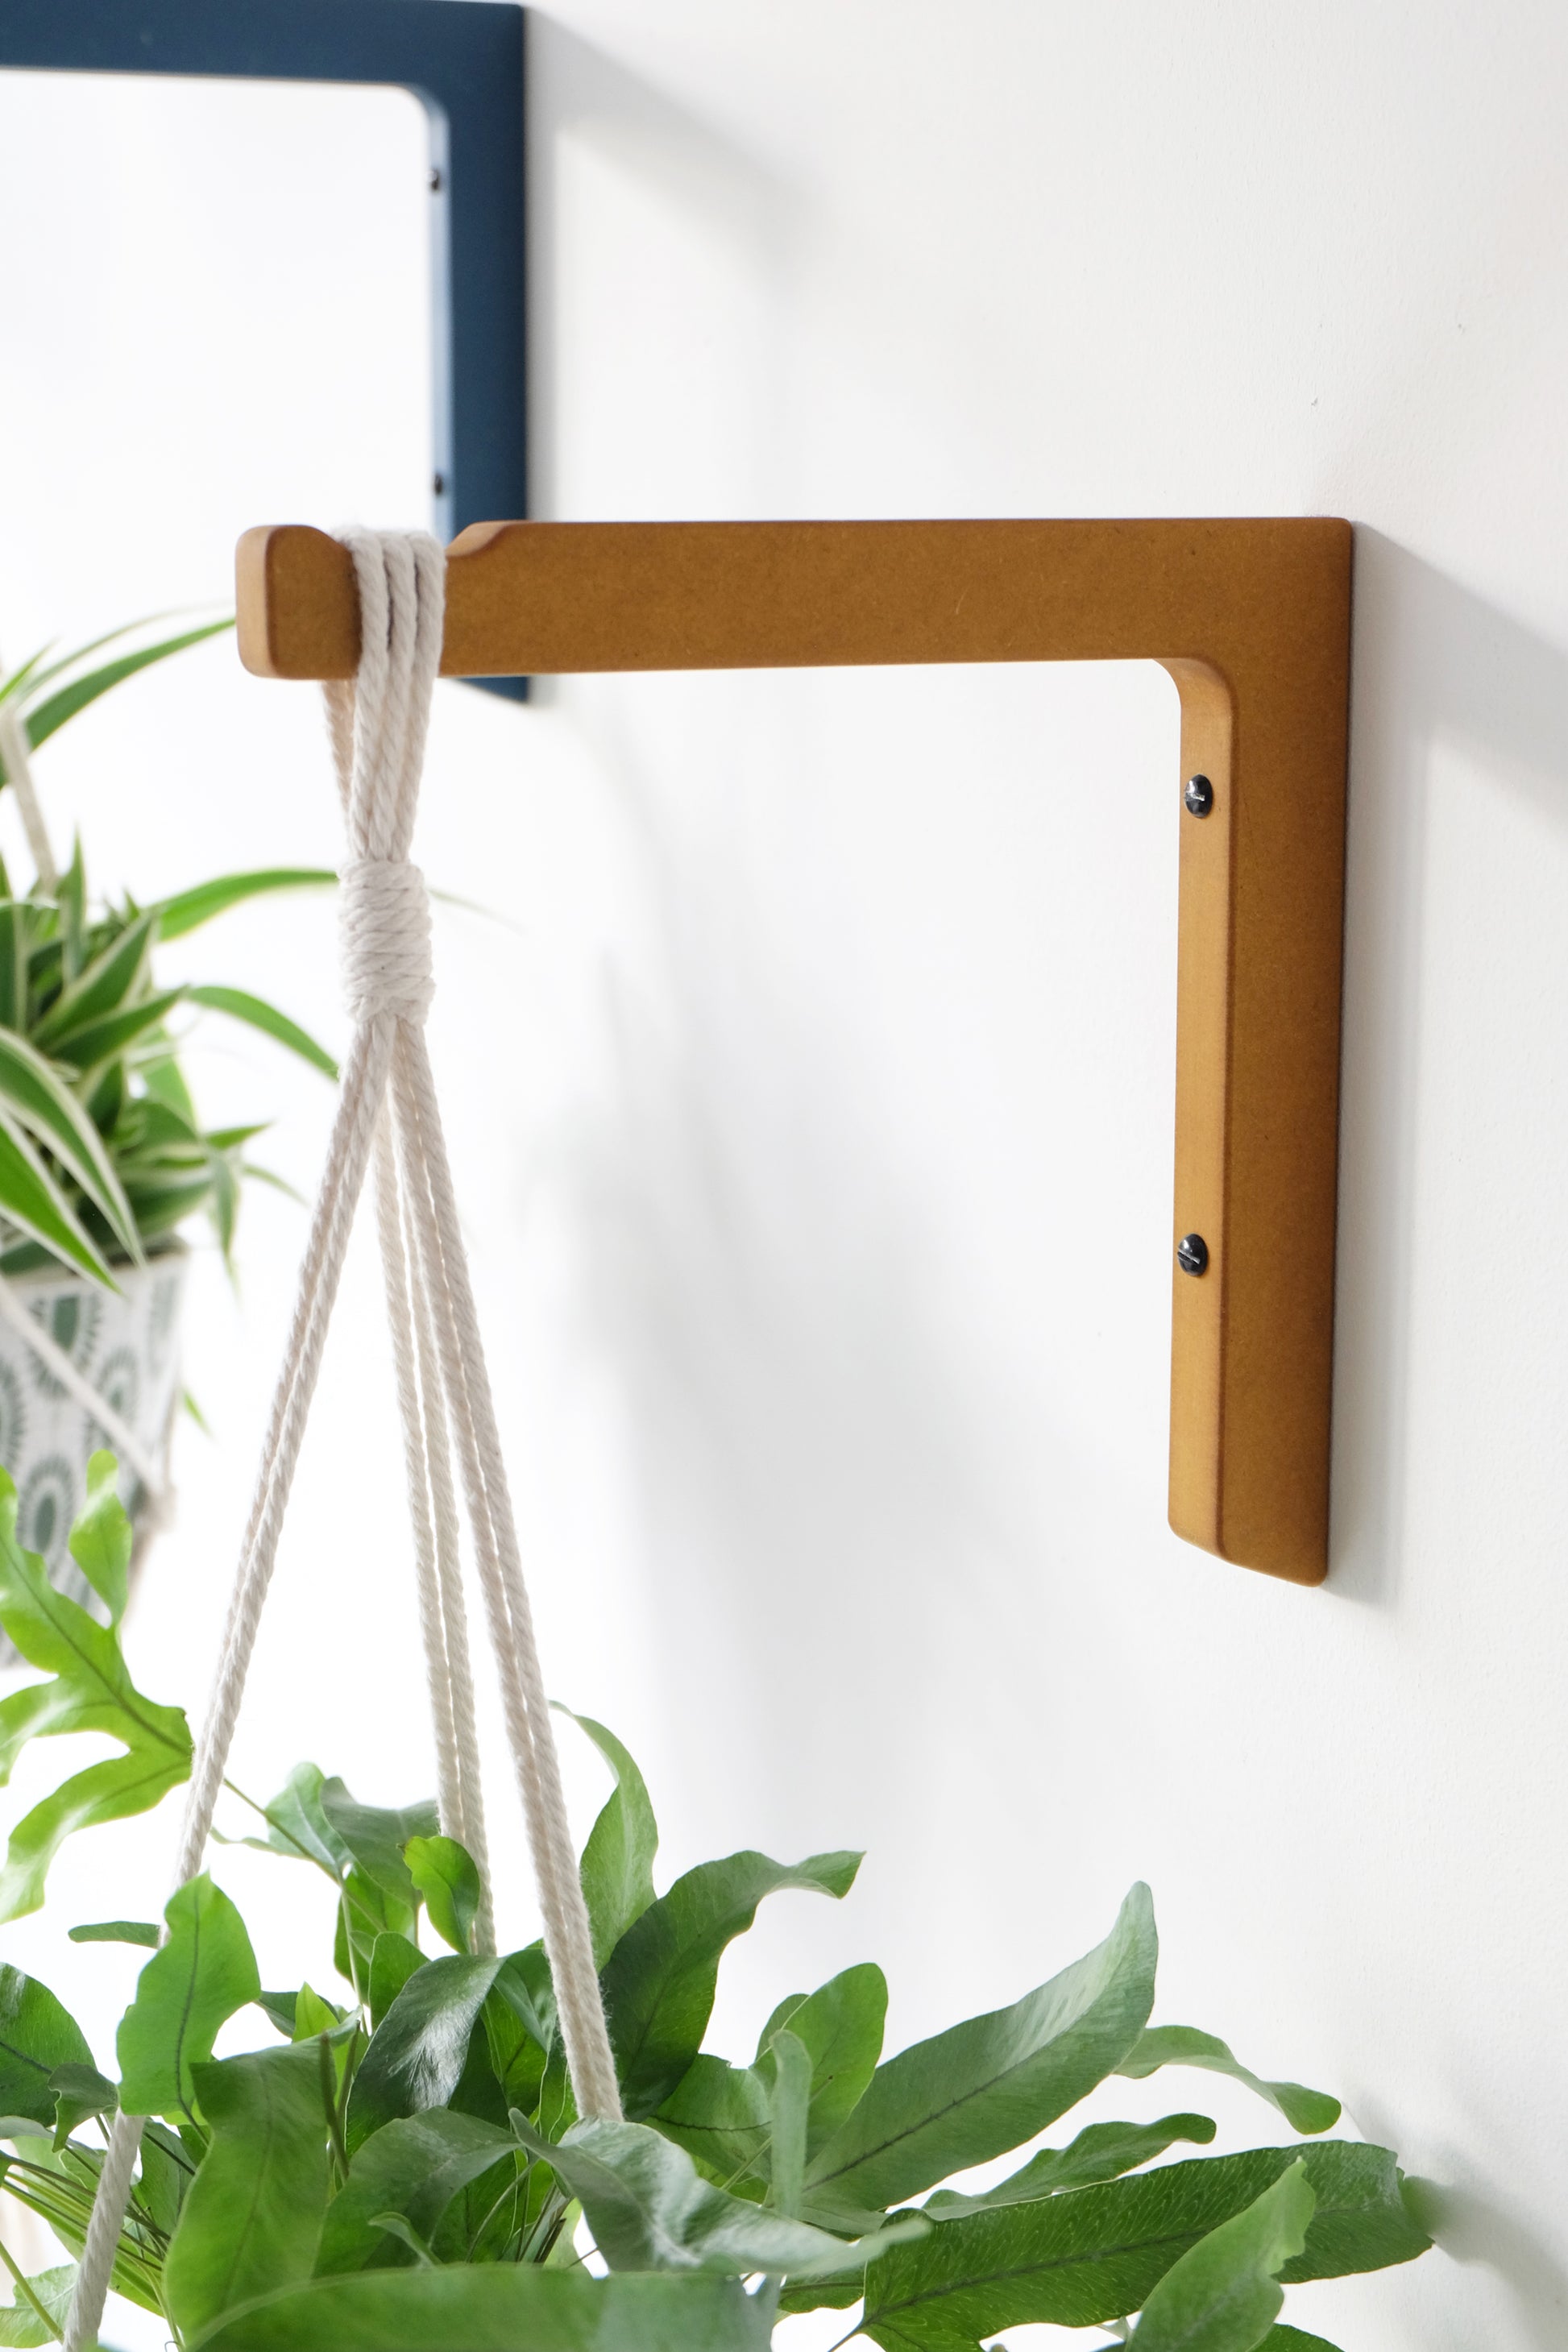 Two Wall Plant Hanger, Wall Hook for Plants, Wooden Plant Hanger, Wall  Plant Hook, Hanging Planter, Hanging Plant Holder 